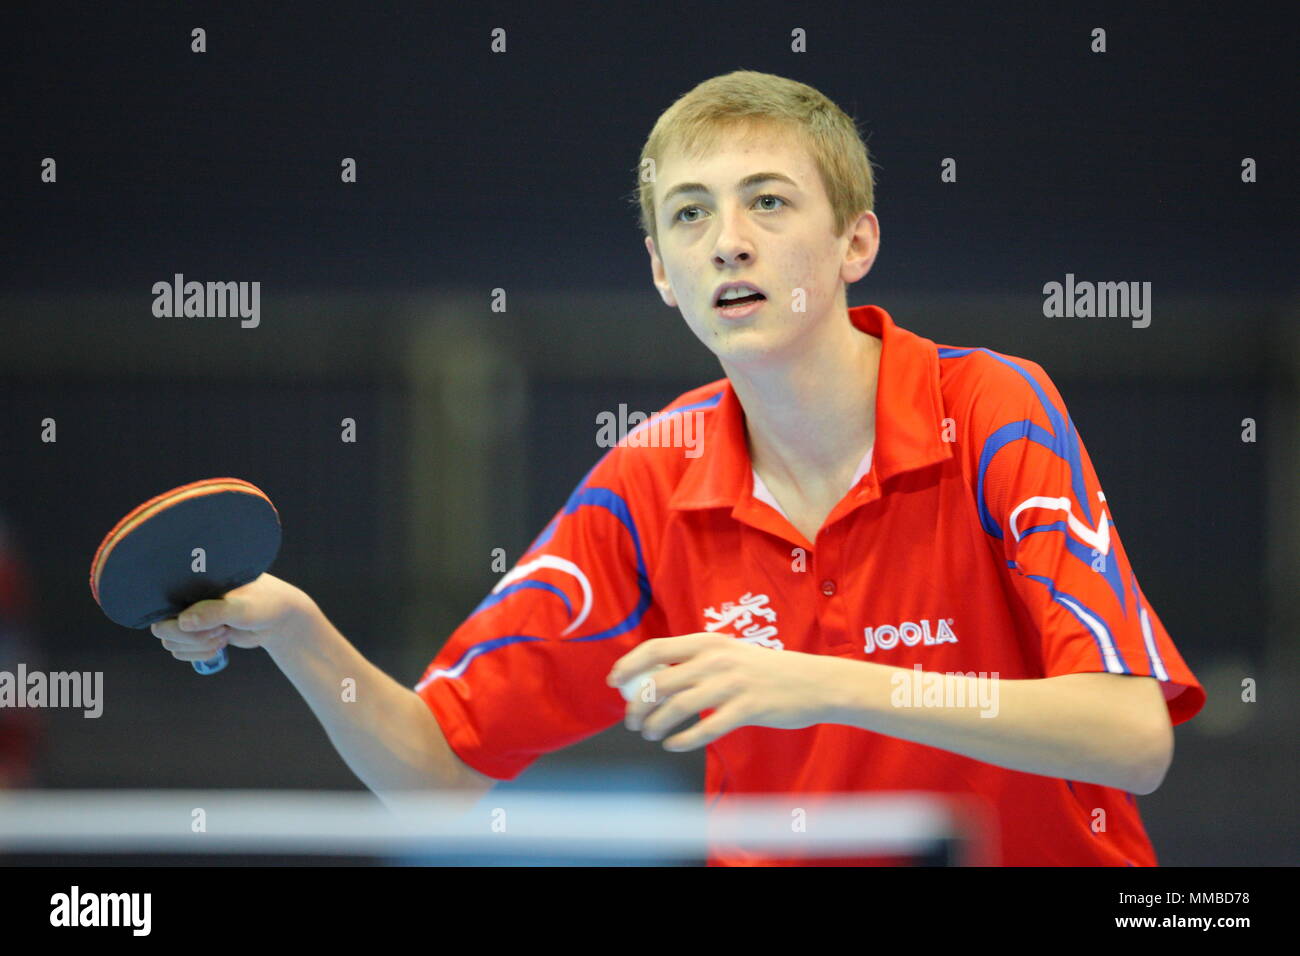 UK Sport - London 2012 Olympic test event Table Tennis, Liam Pitchford,  Excel London. 23 November 2011 Stock Photo - Alamy